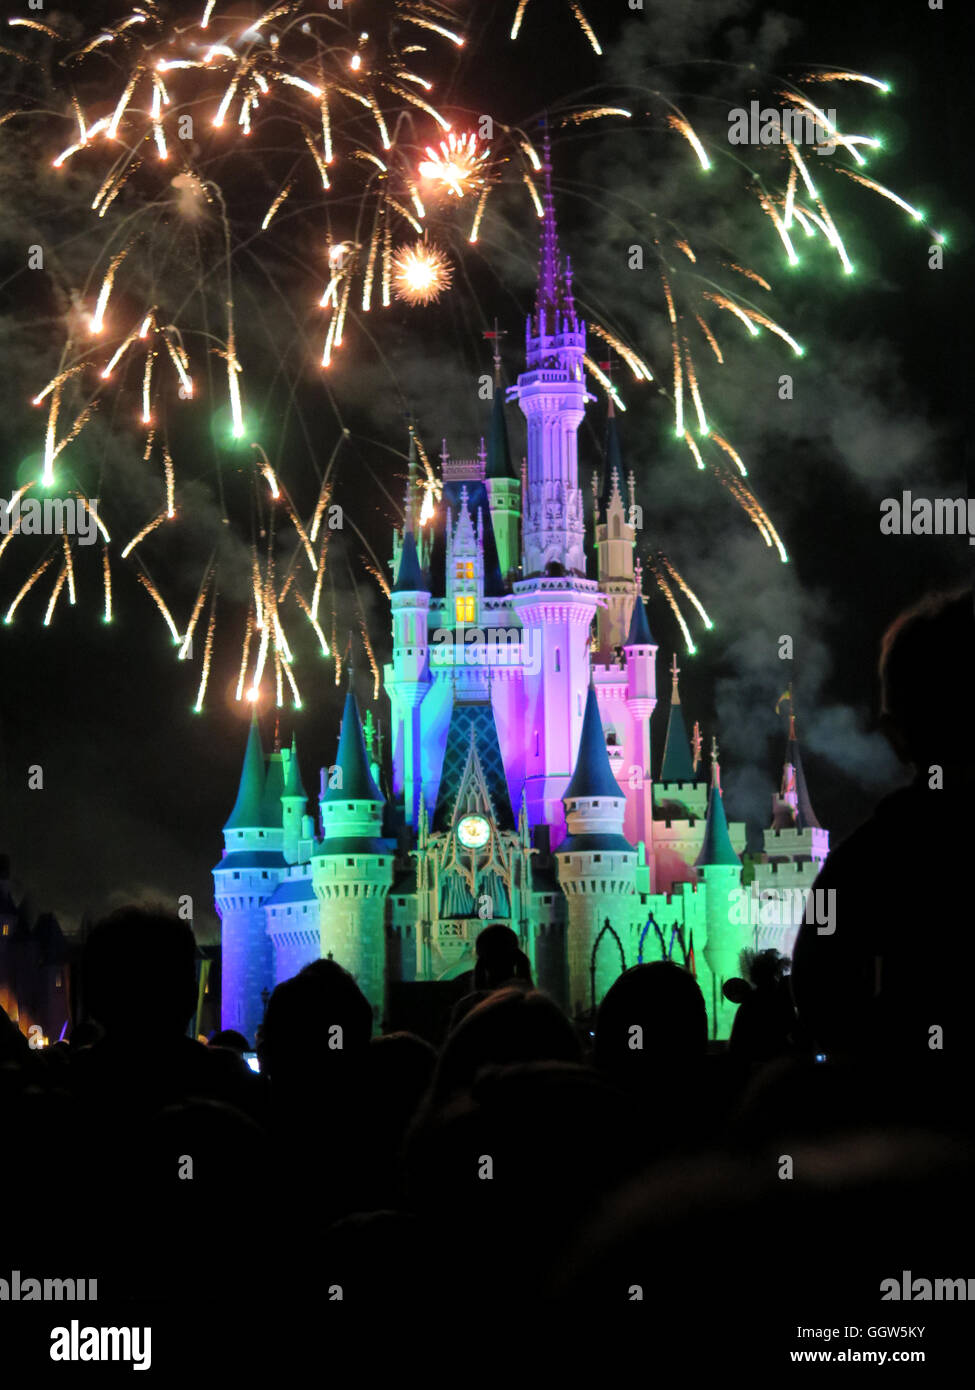 Middle Disney S Magic Castle Florida Editorial Photography - Image of  world, building: 24450947